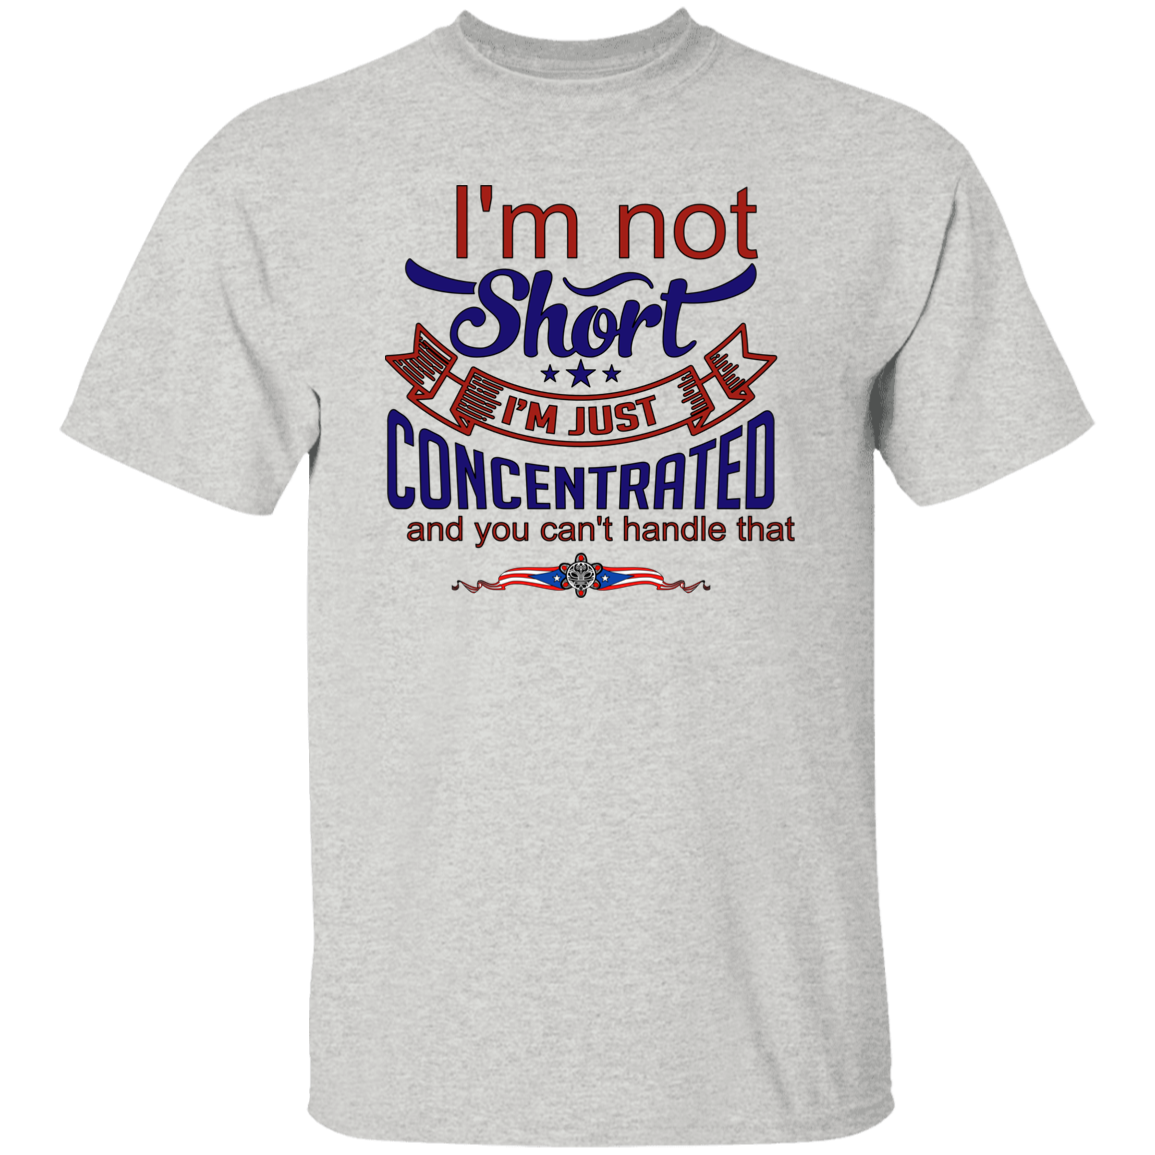 I'm Not Short, Just Concentrated 5.3 oz. T-Shirt